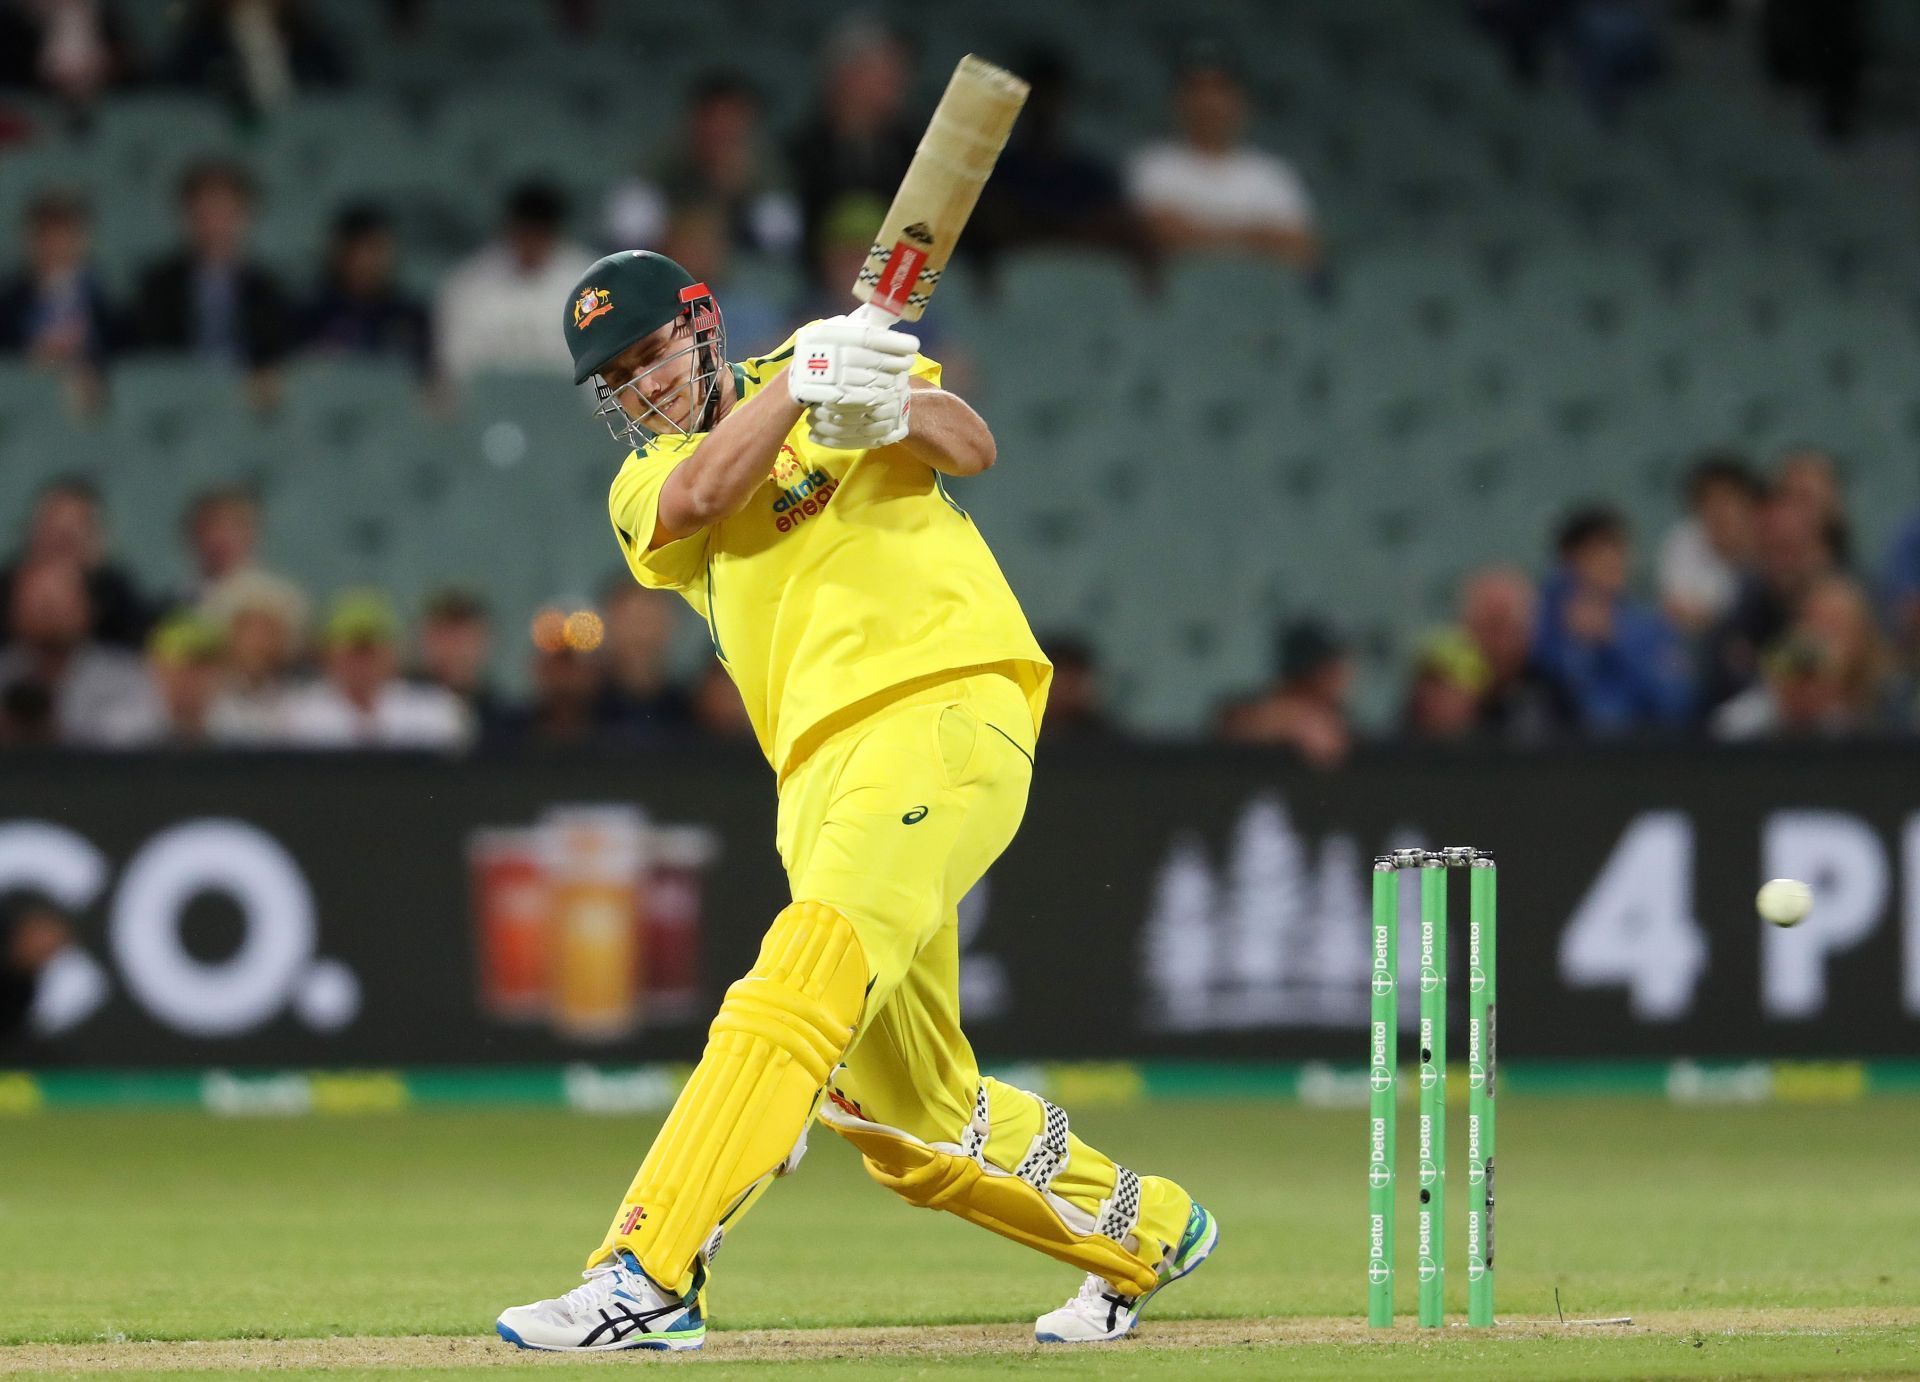 Camreon Green has an astounding strike-rate opening the batting for Australia in T20Is